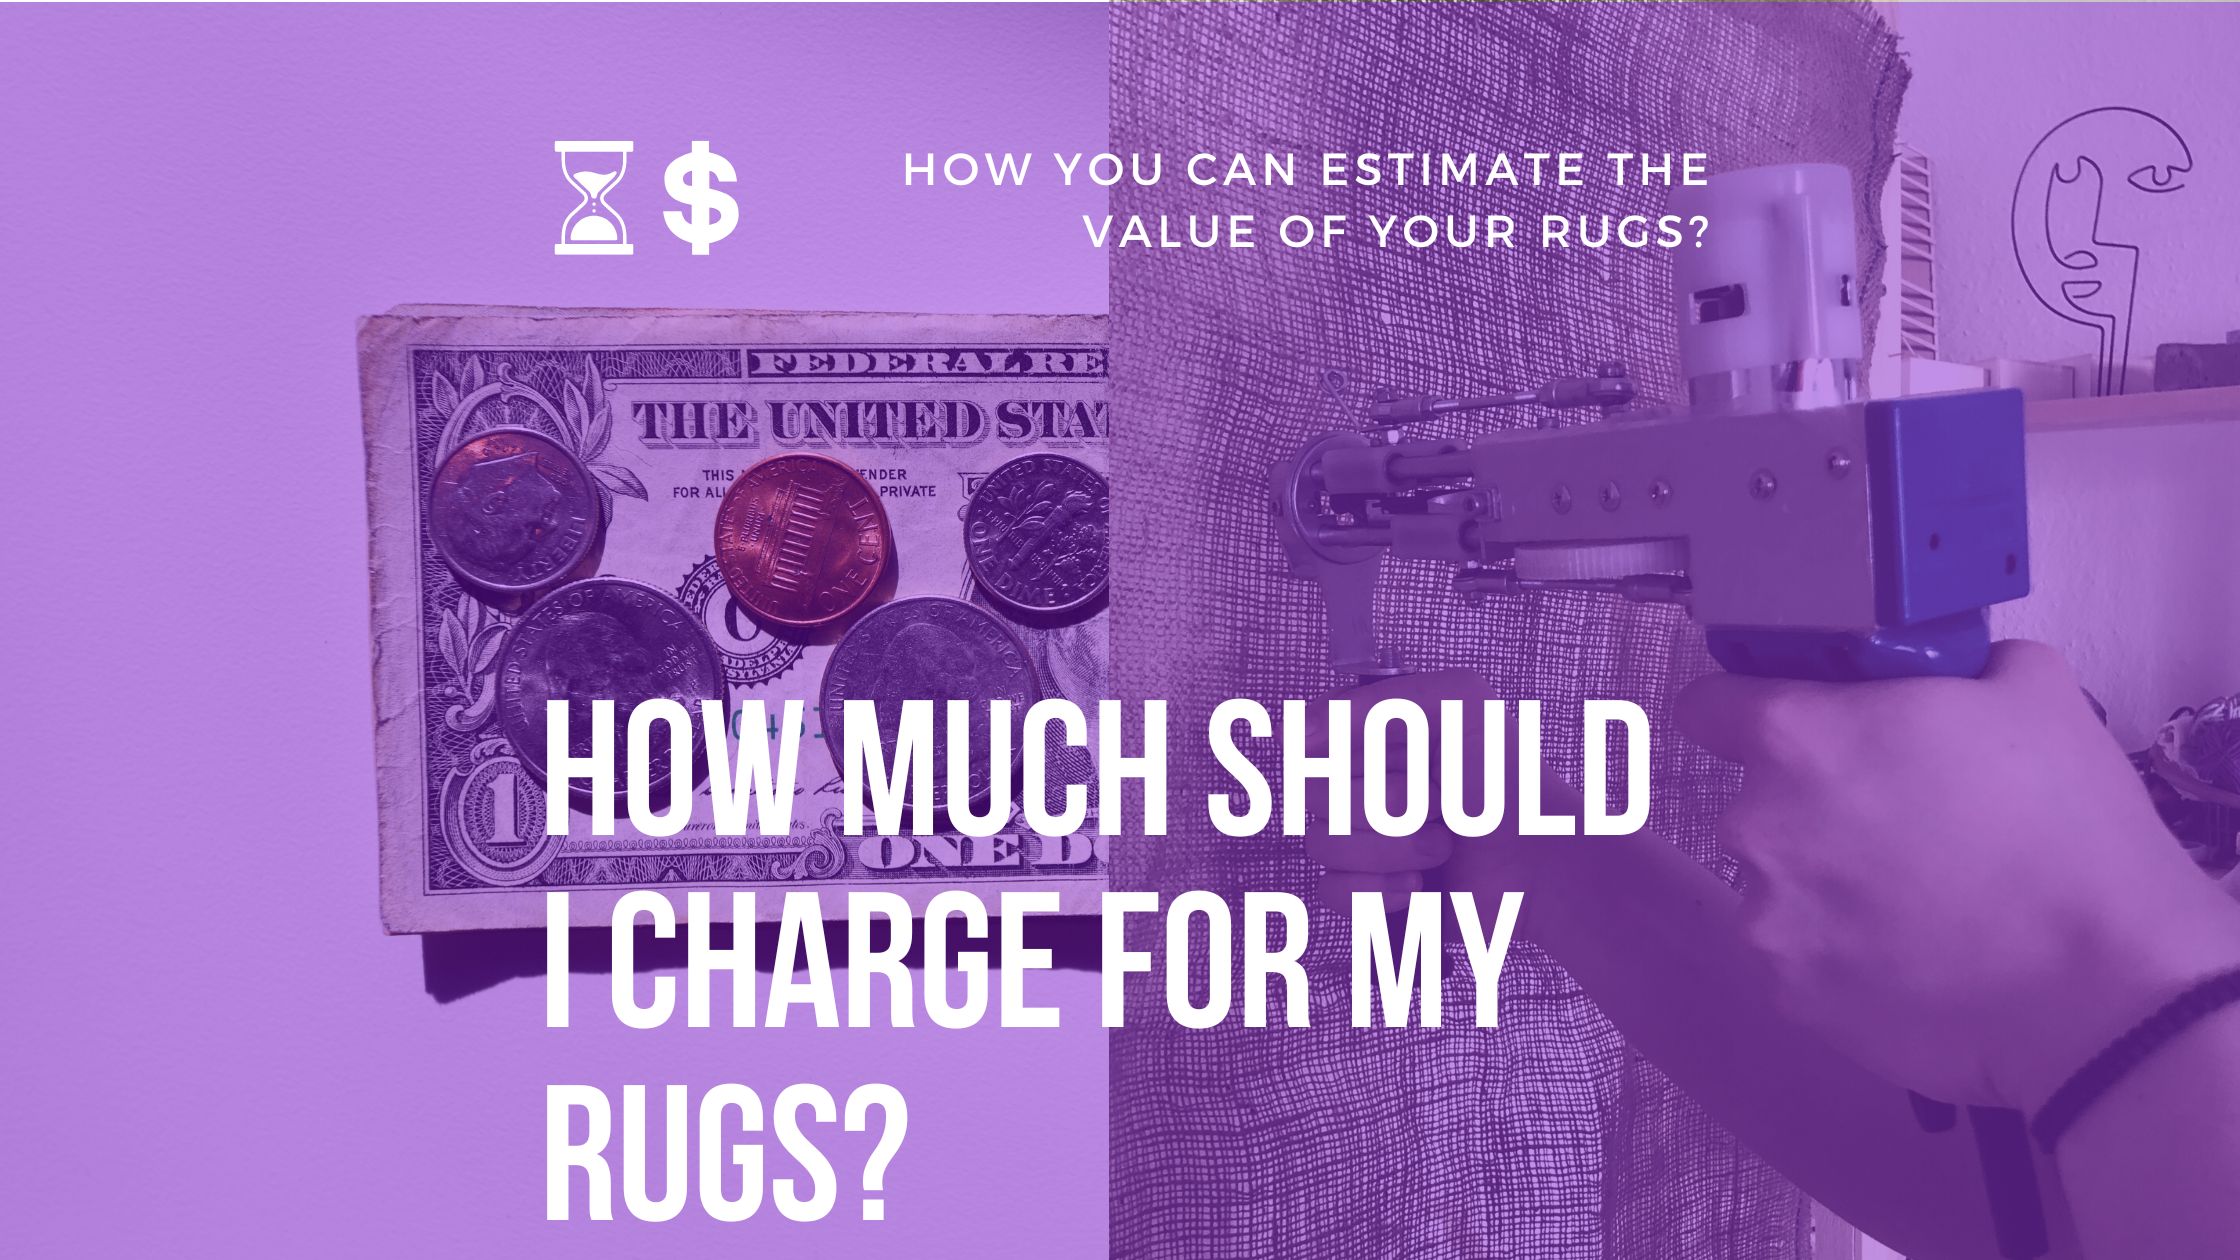 How Much Should I Charge For My Rugs?